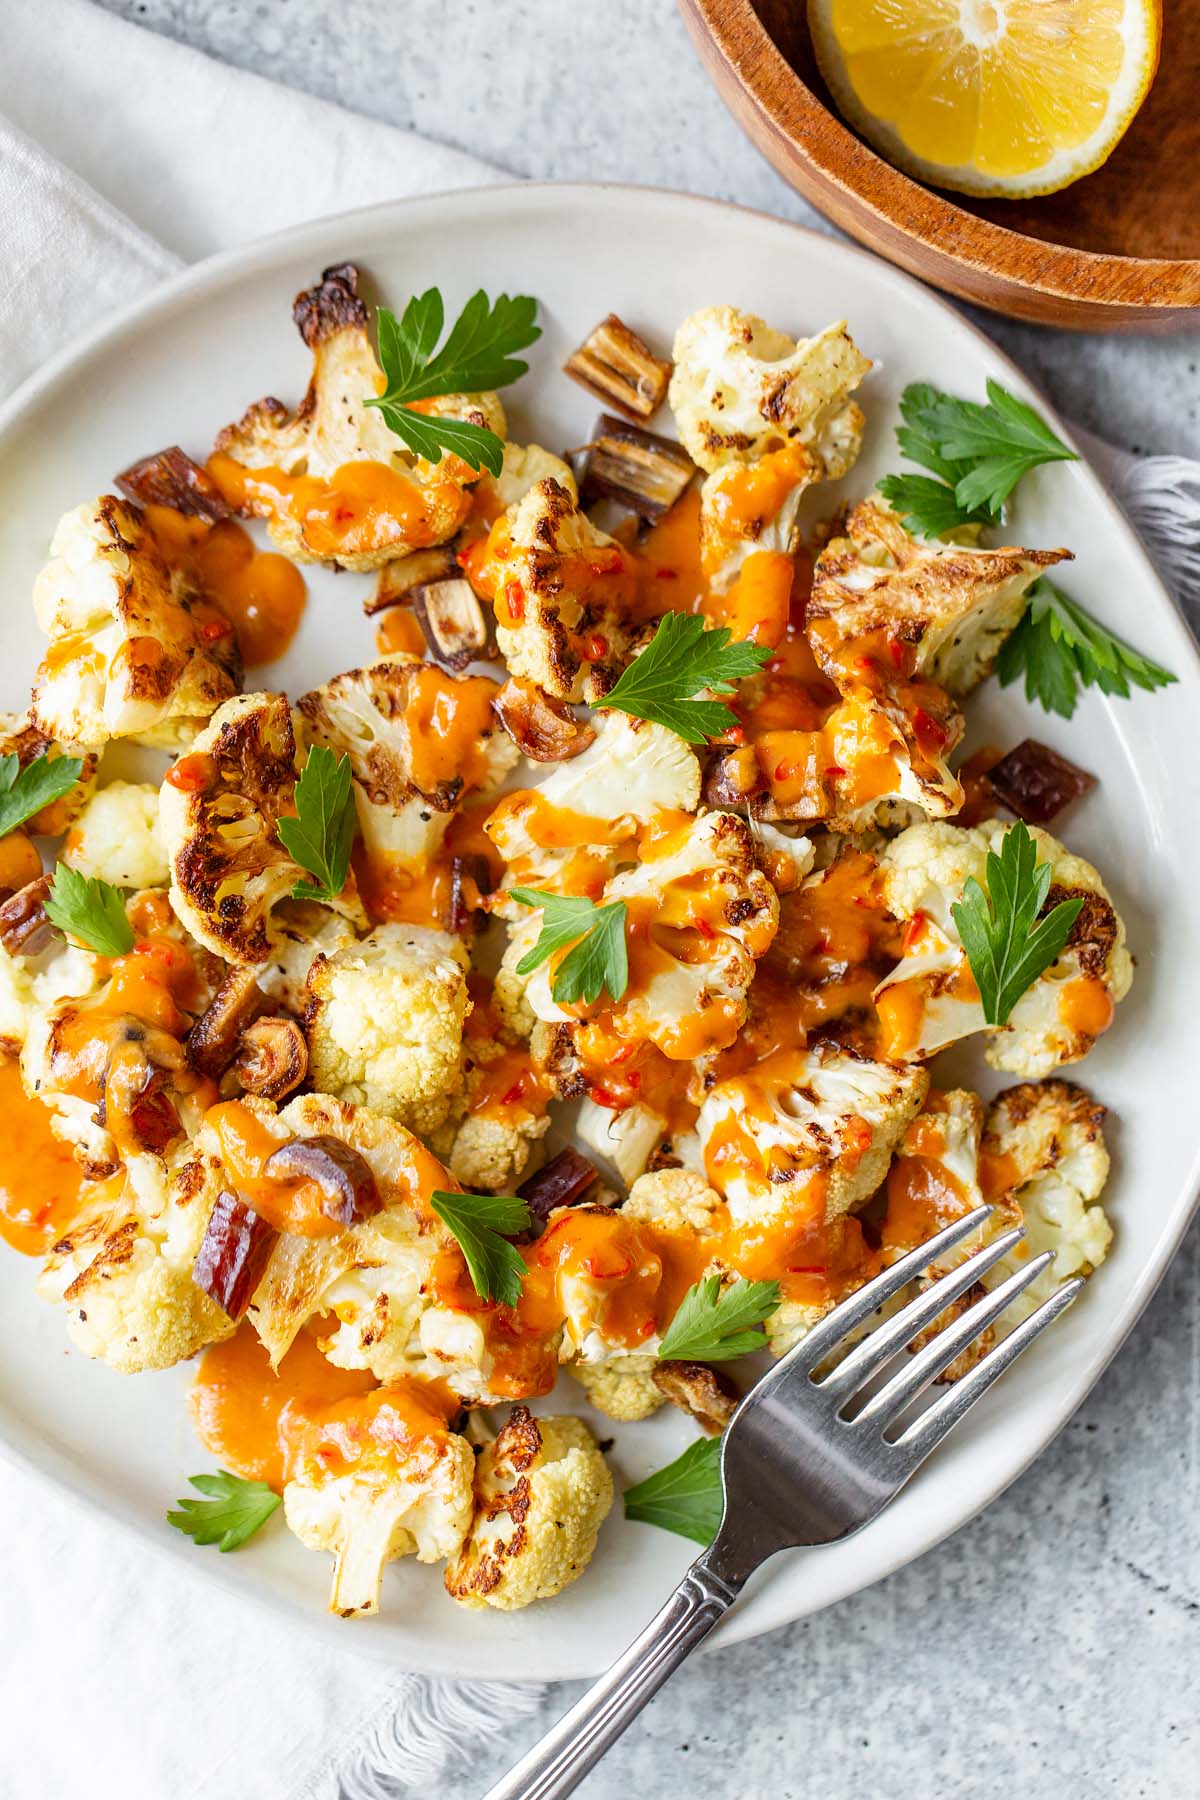 roasted cauliflower topped with harissa sauce